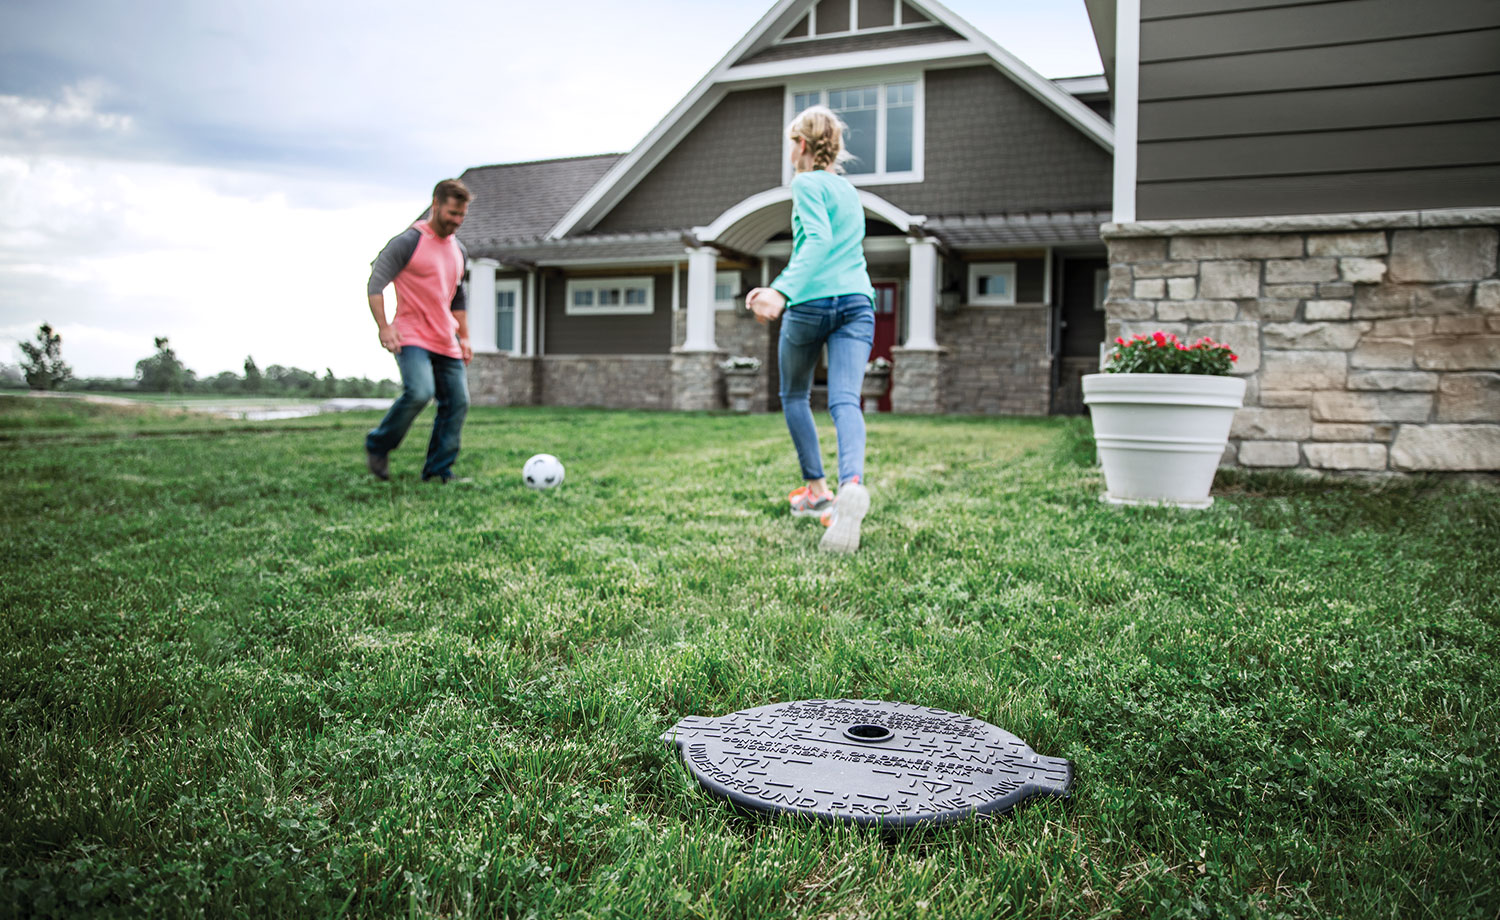 Man and daughter playing in a backyard near an underground propane tank lid